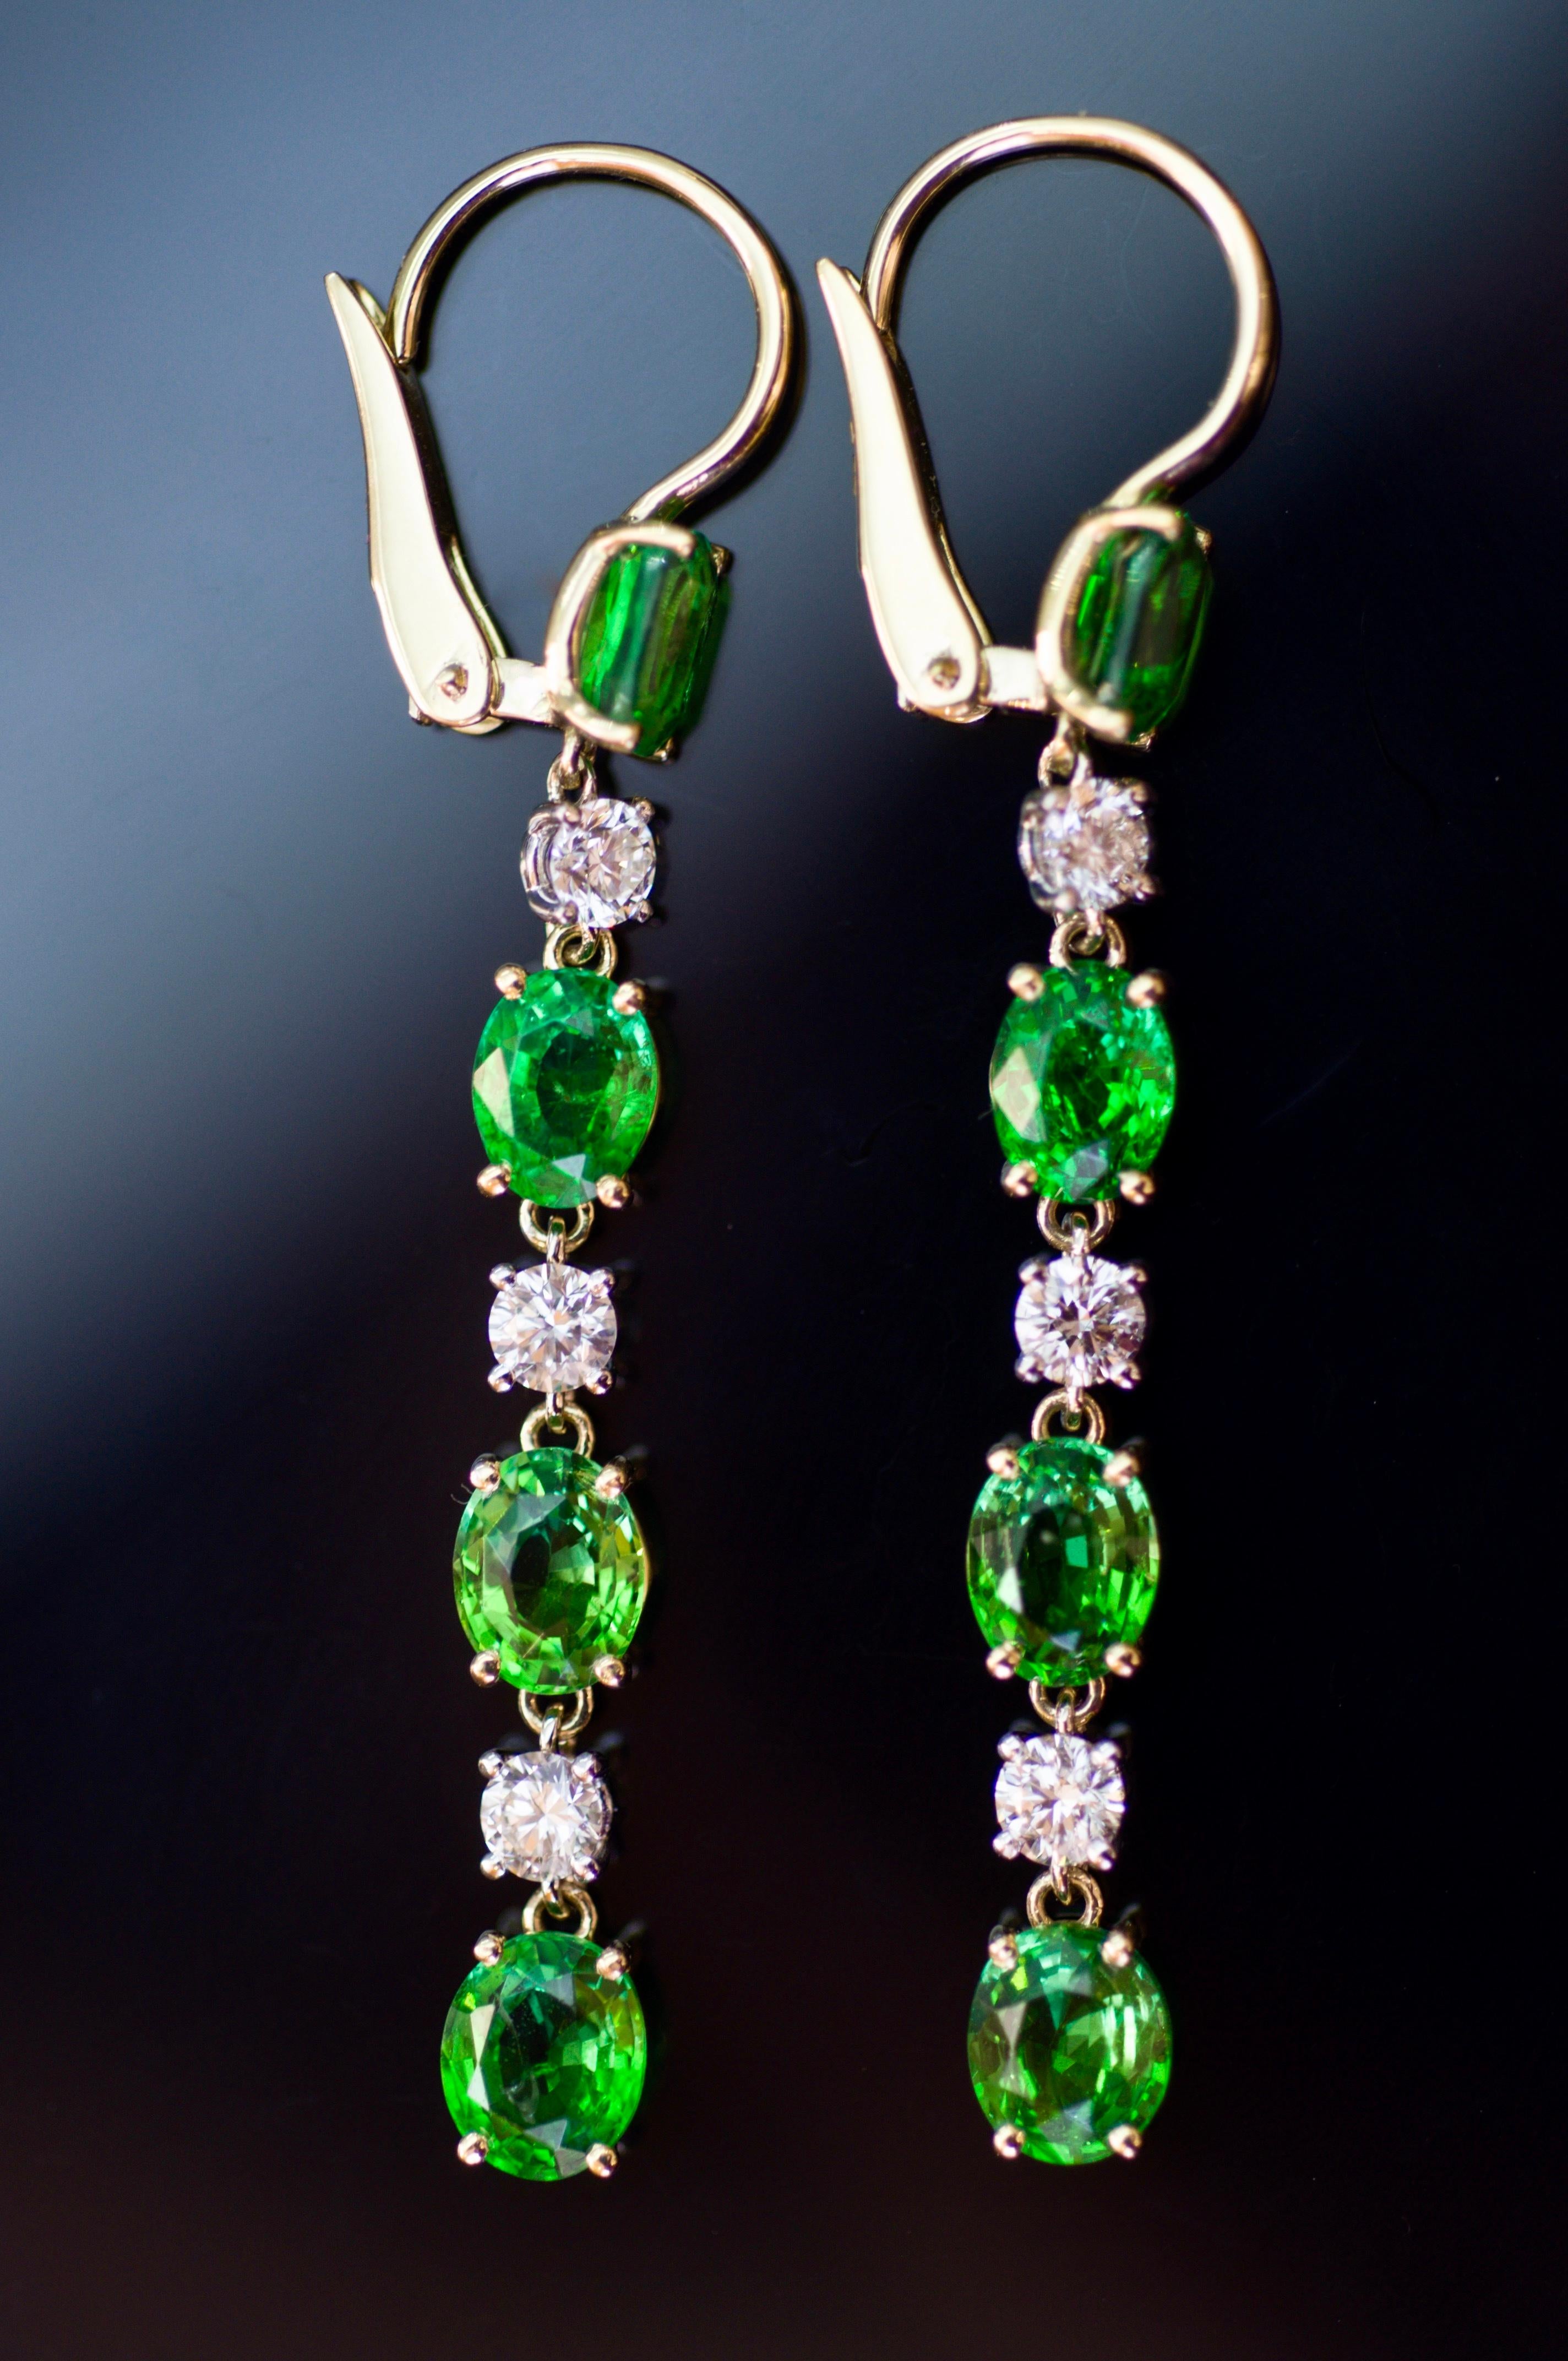 These earrings are very elegant and attractive - yellow gold, diamonds and tsavorites with neon rich green color from Tanzania. 
With such earrings you could make any of your outfits looking fabulous. 
They will move with every step you make and